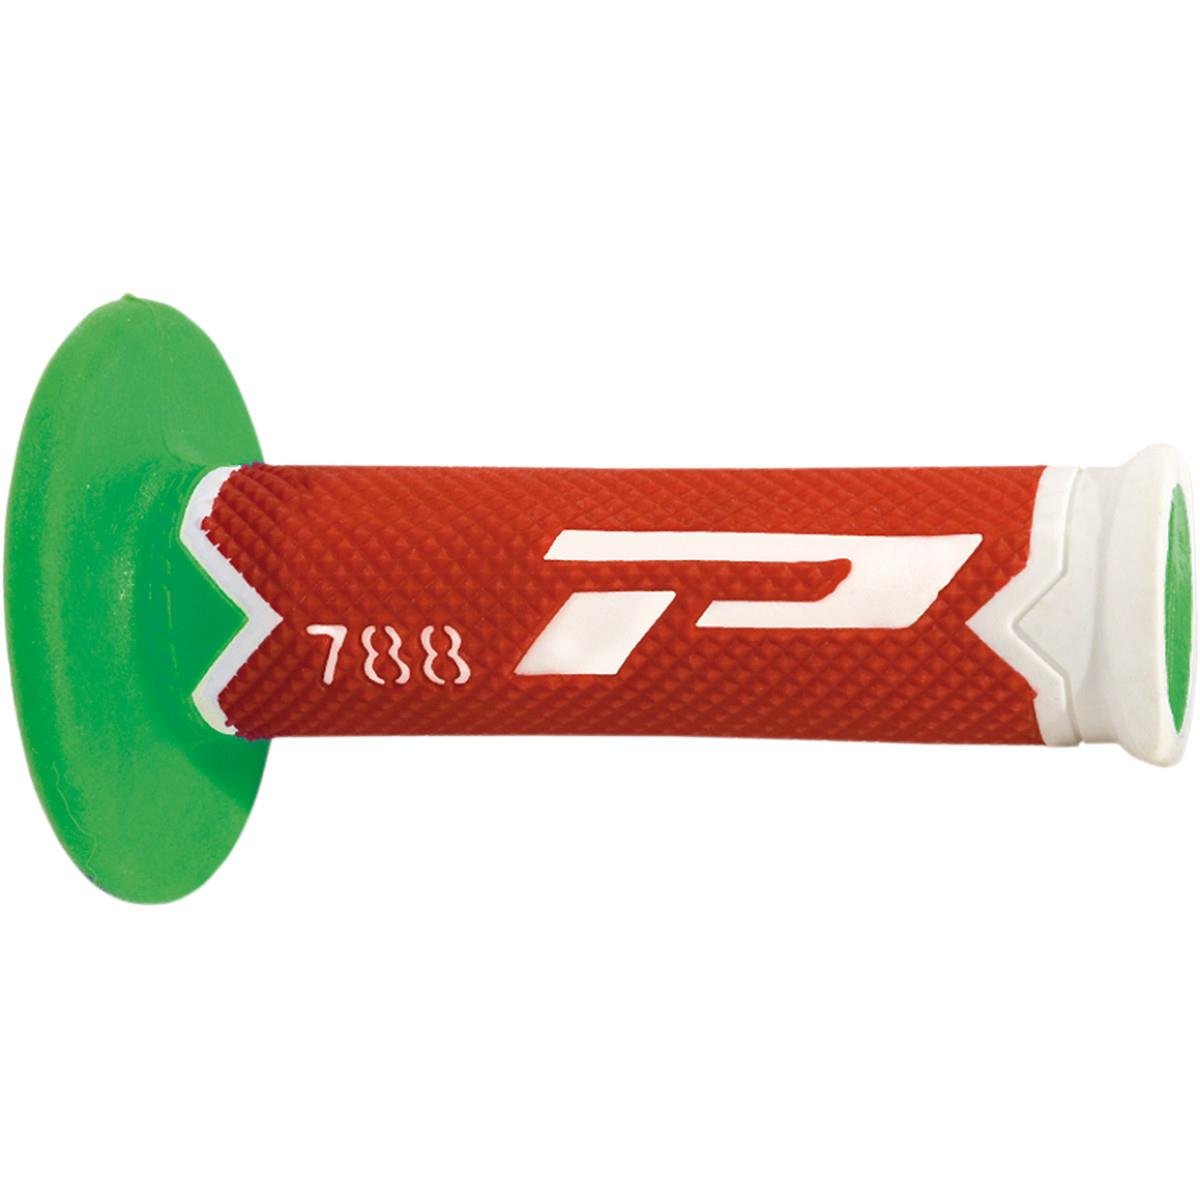 ProGrip Grips 788 White/Red/Green